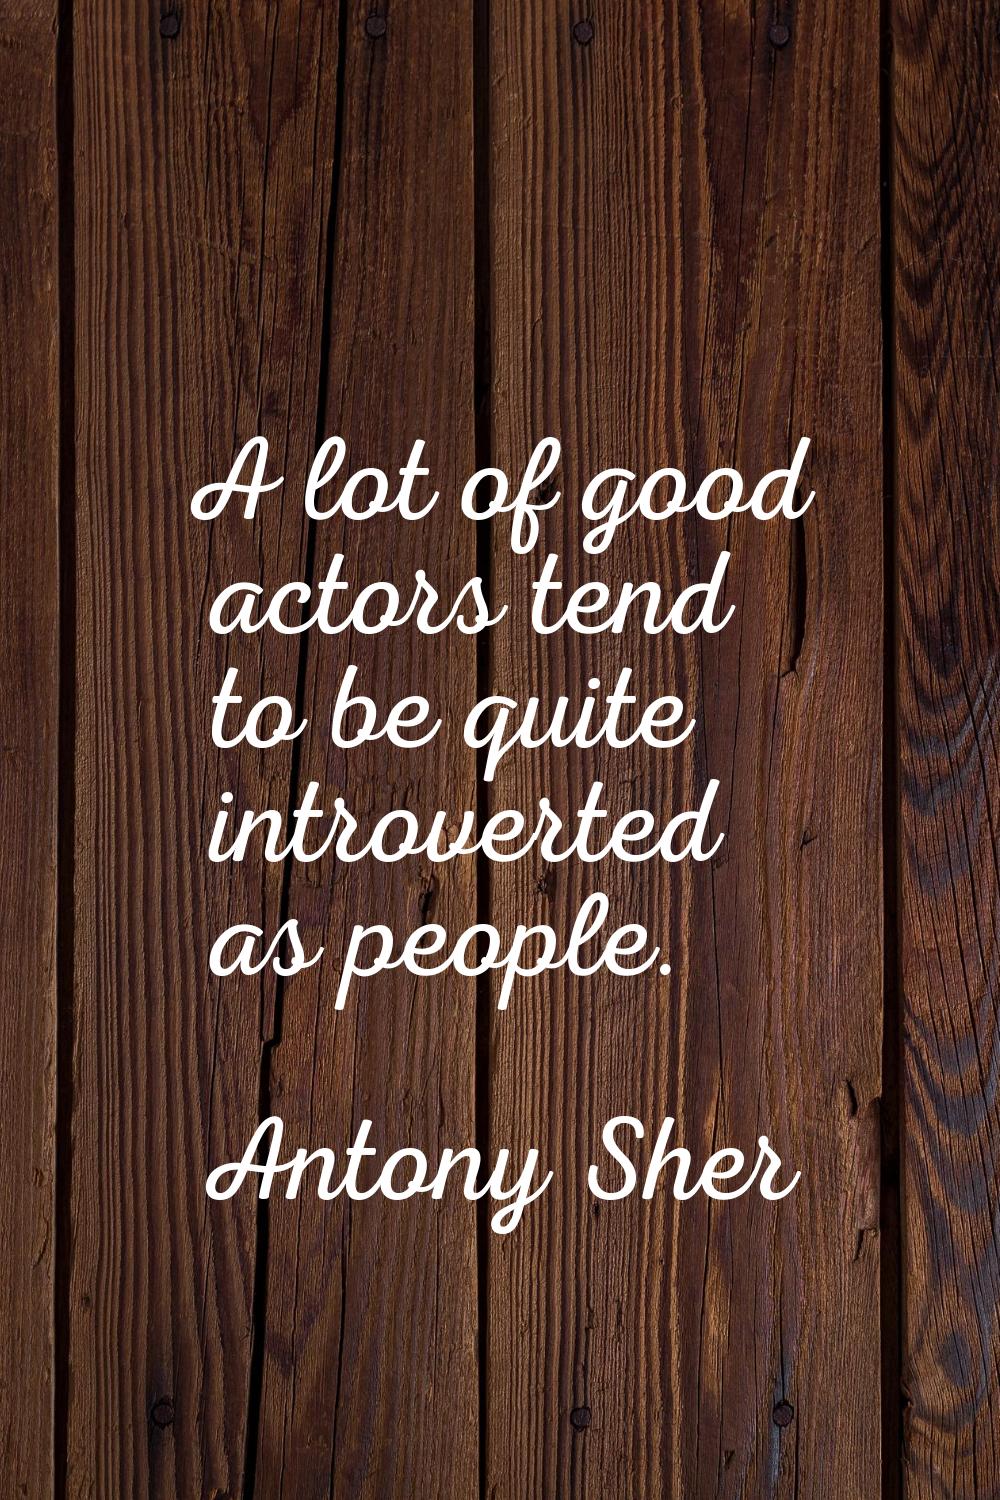 A lot of good actors tend to be quite introverted as people.